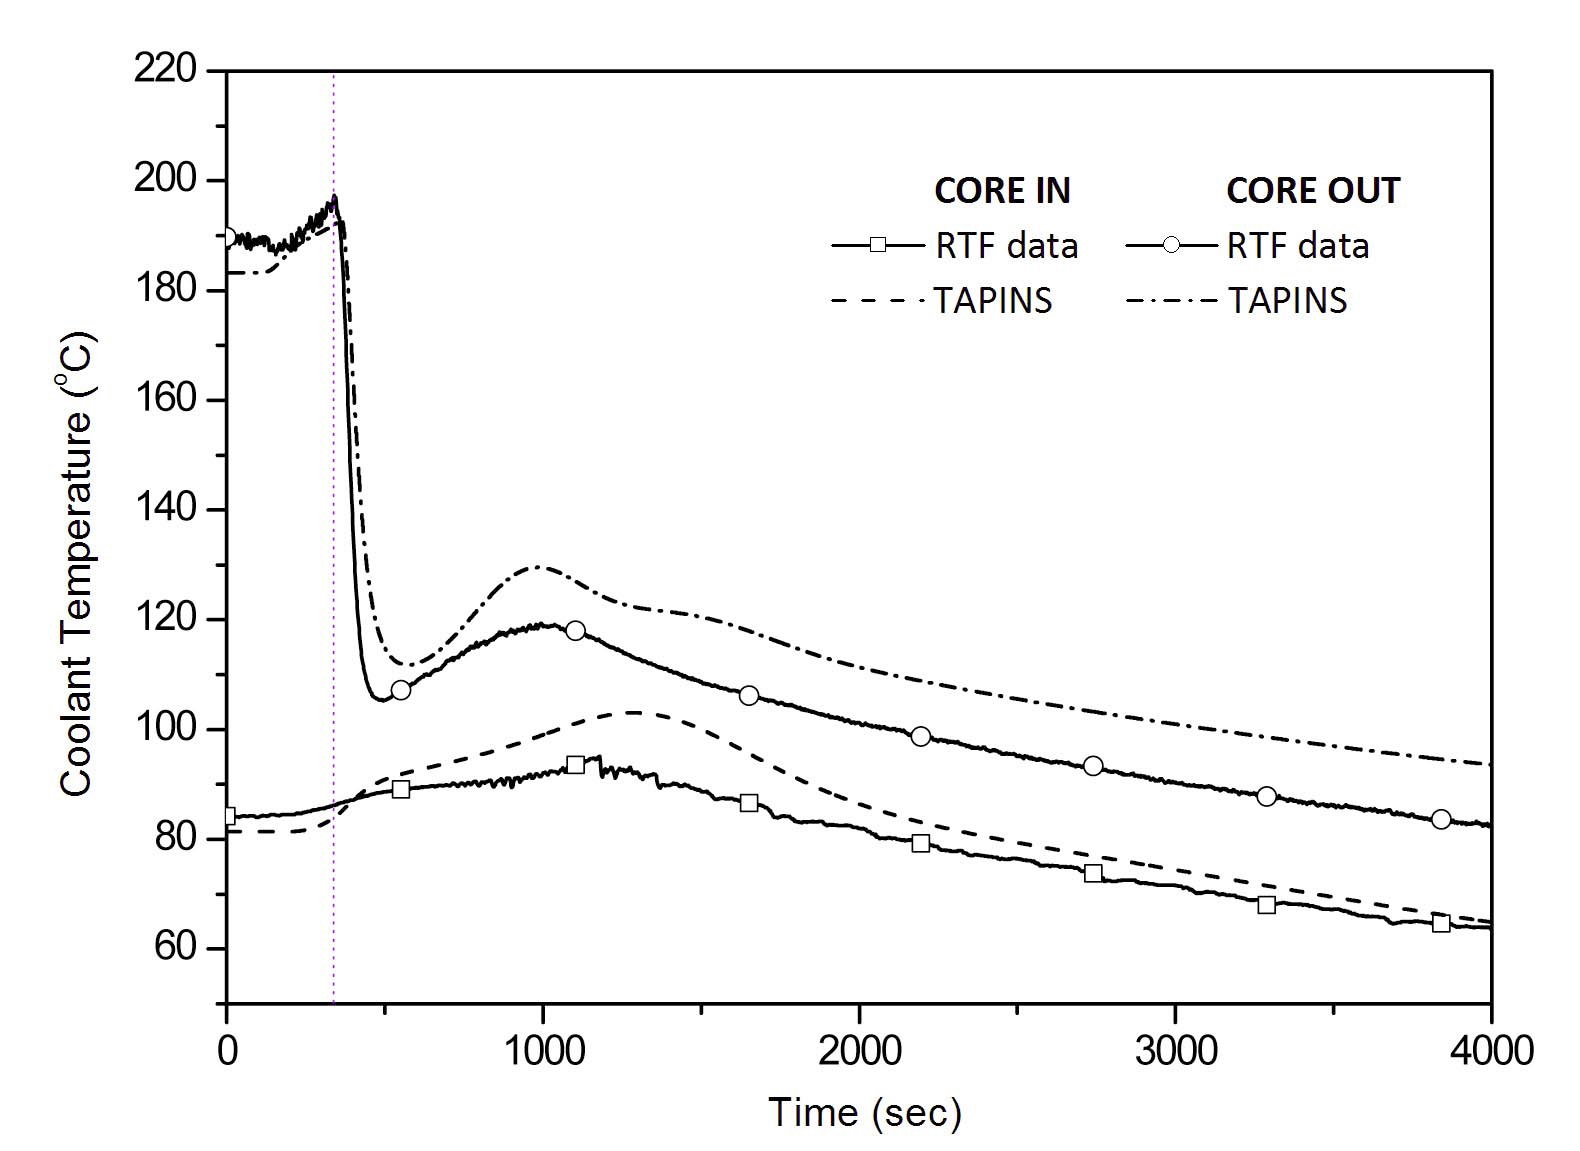 Coolant Temperatures in Response to the LOFW Accident